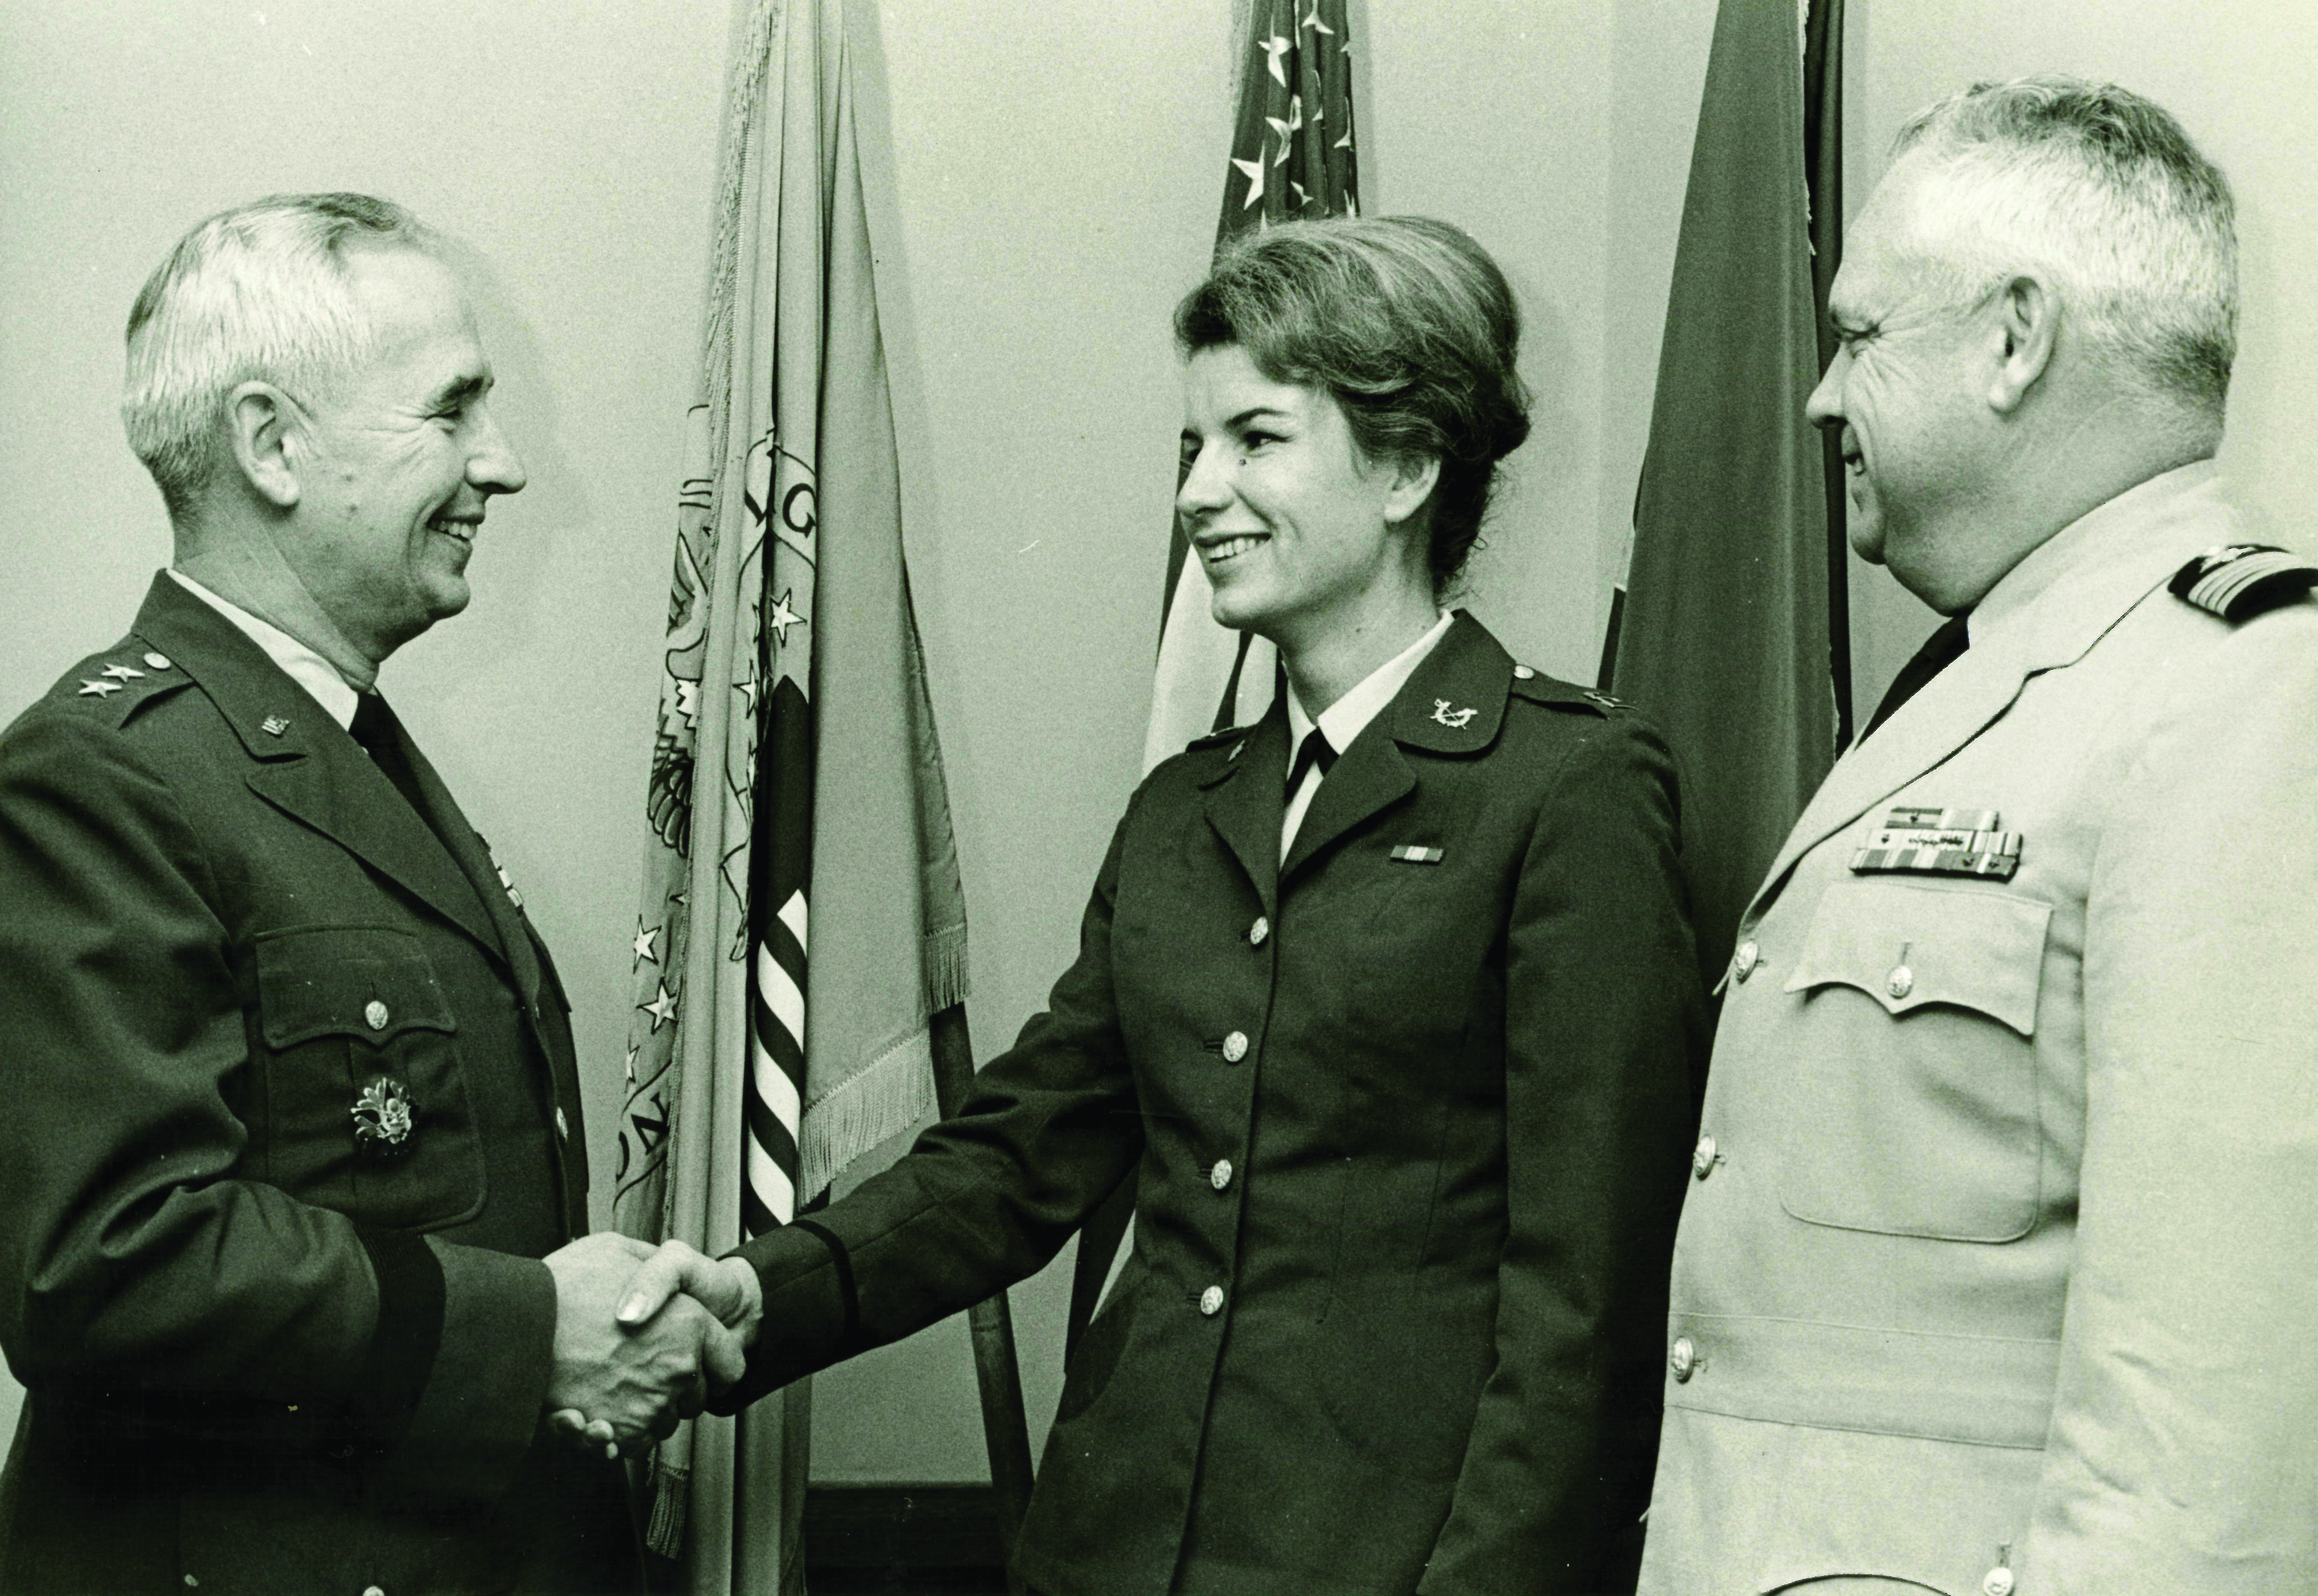 Captain Nancy Hunter’s inter-service transfer from the Navy to the Army is unique in JAG Corps history. In this
        photograph, taken in 1967, she wears an Army uniform and crossed-sword-and-pen insignia for the first time.
        (Photo courtesy of author)